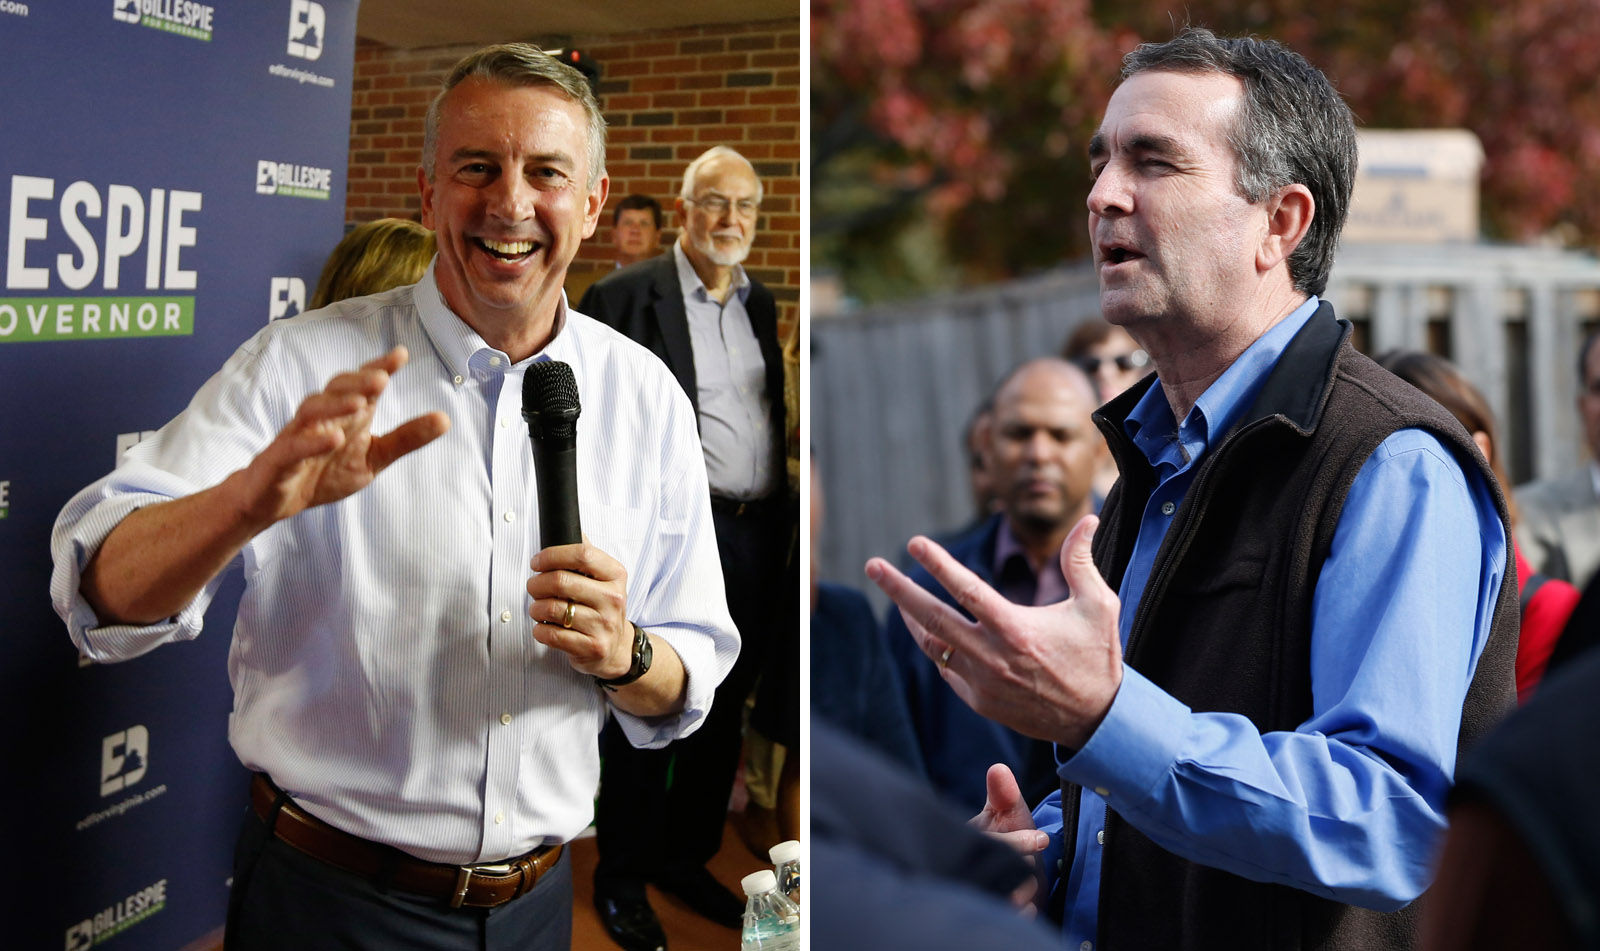 Republican Ed Gillespie, left, and Democrat Ralph Northam, right, rally supporters at get out the vote events before the Nov. 7 election. (The Associated Press)